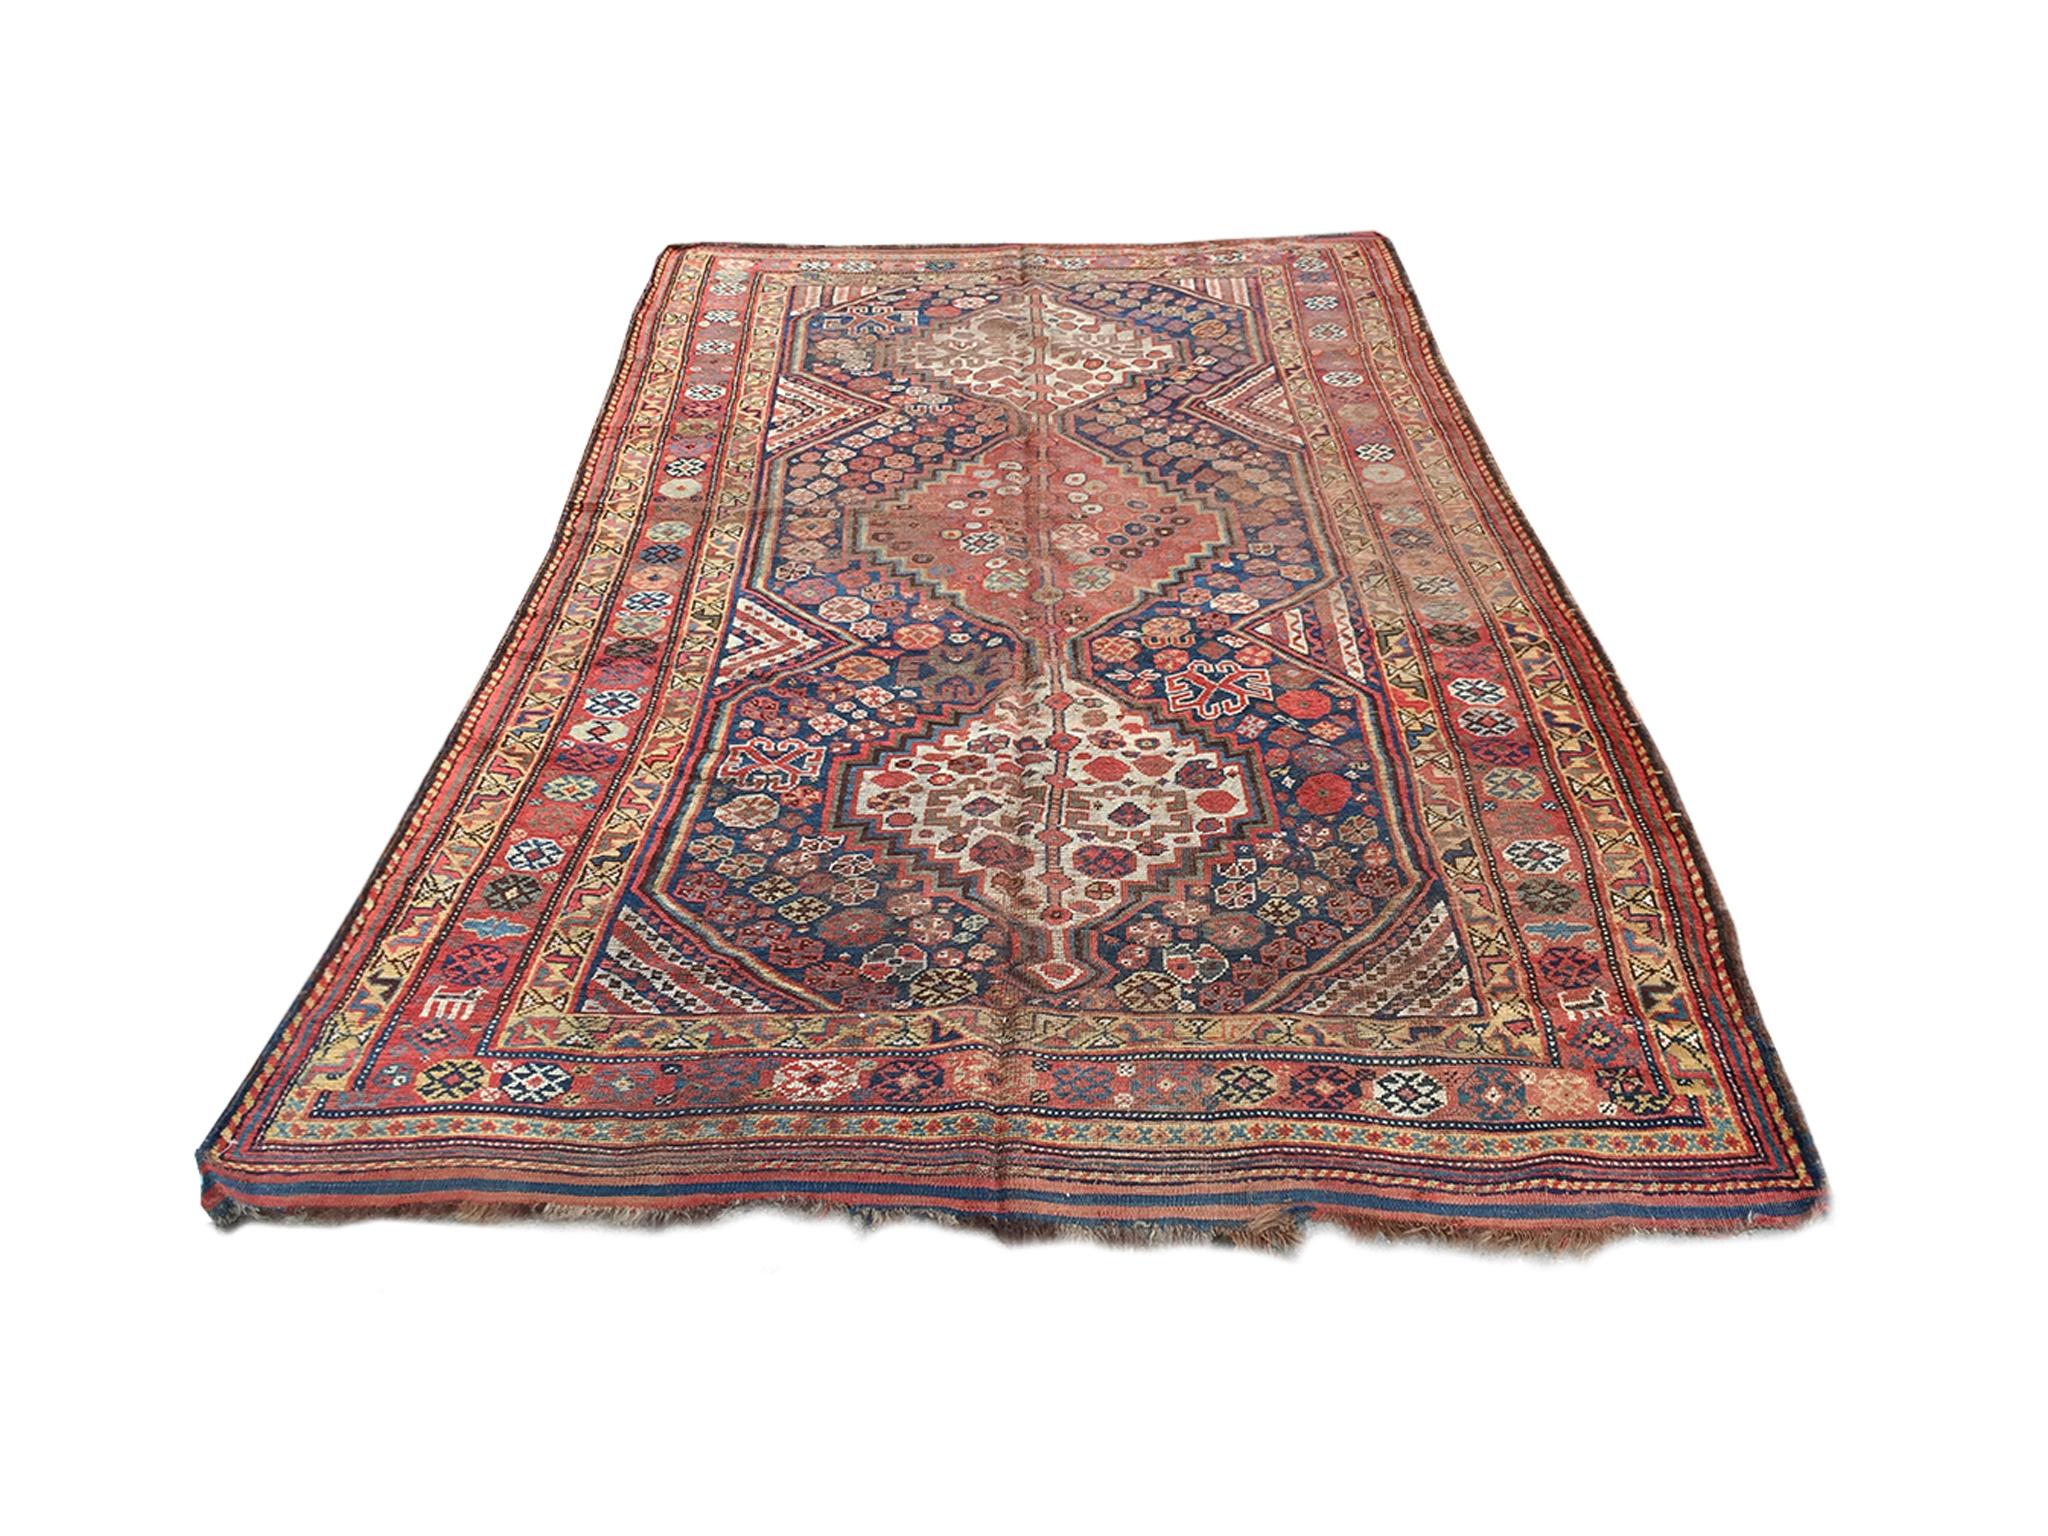 A remarkable handwoven early 20th century Afshar rug. Bold palette of reds, pinks, pale yellows, and blues. The rug's design consists of a central field with a column of three medallions. Floral-like geometric shapes are arranged in clusters within